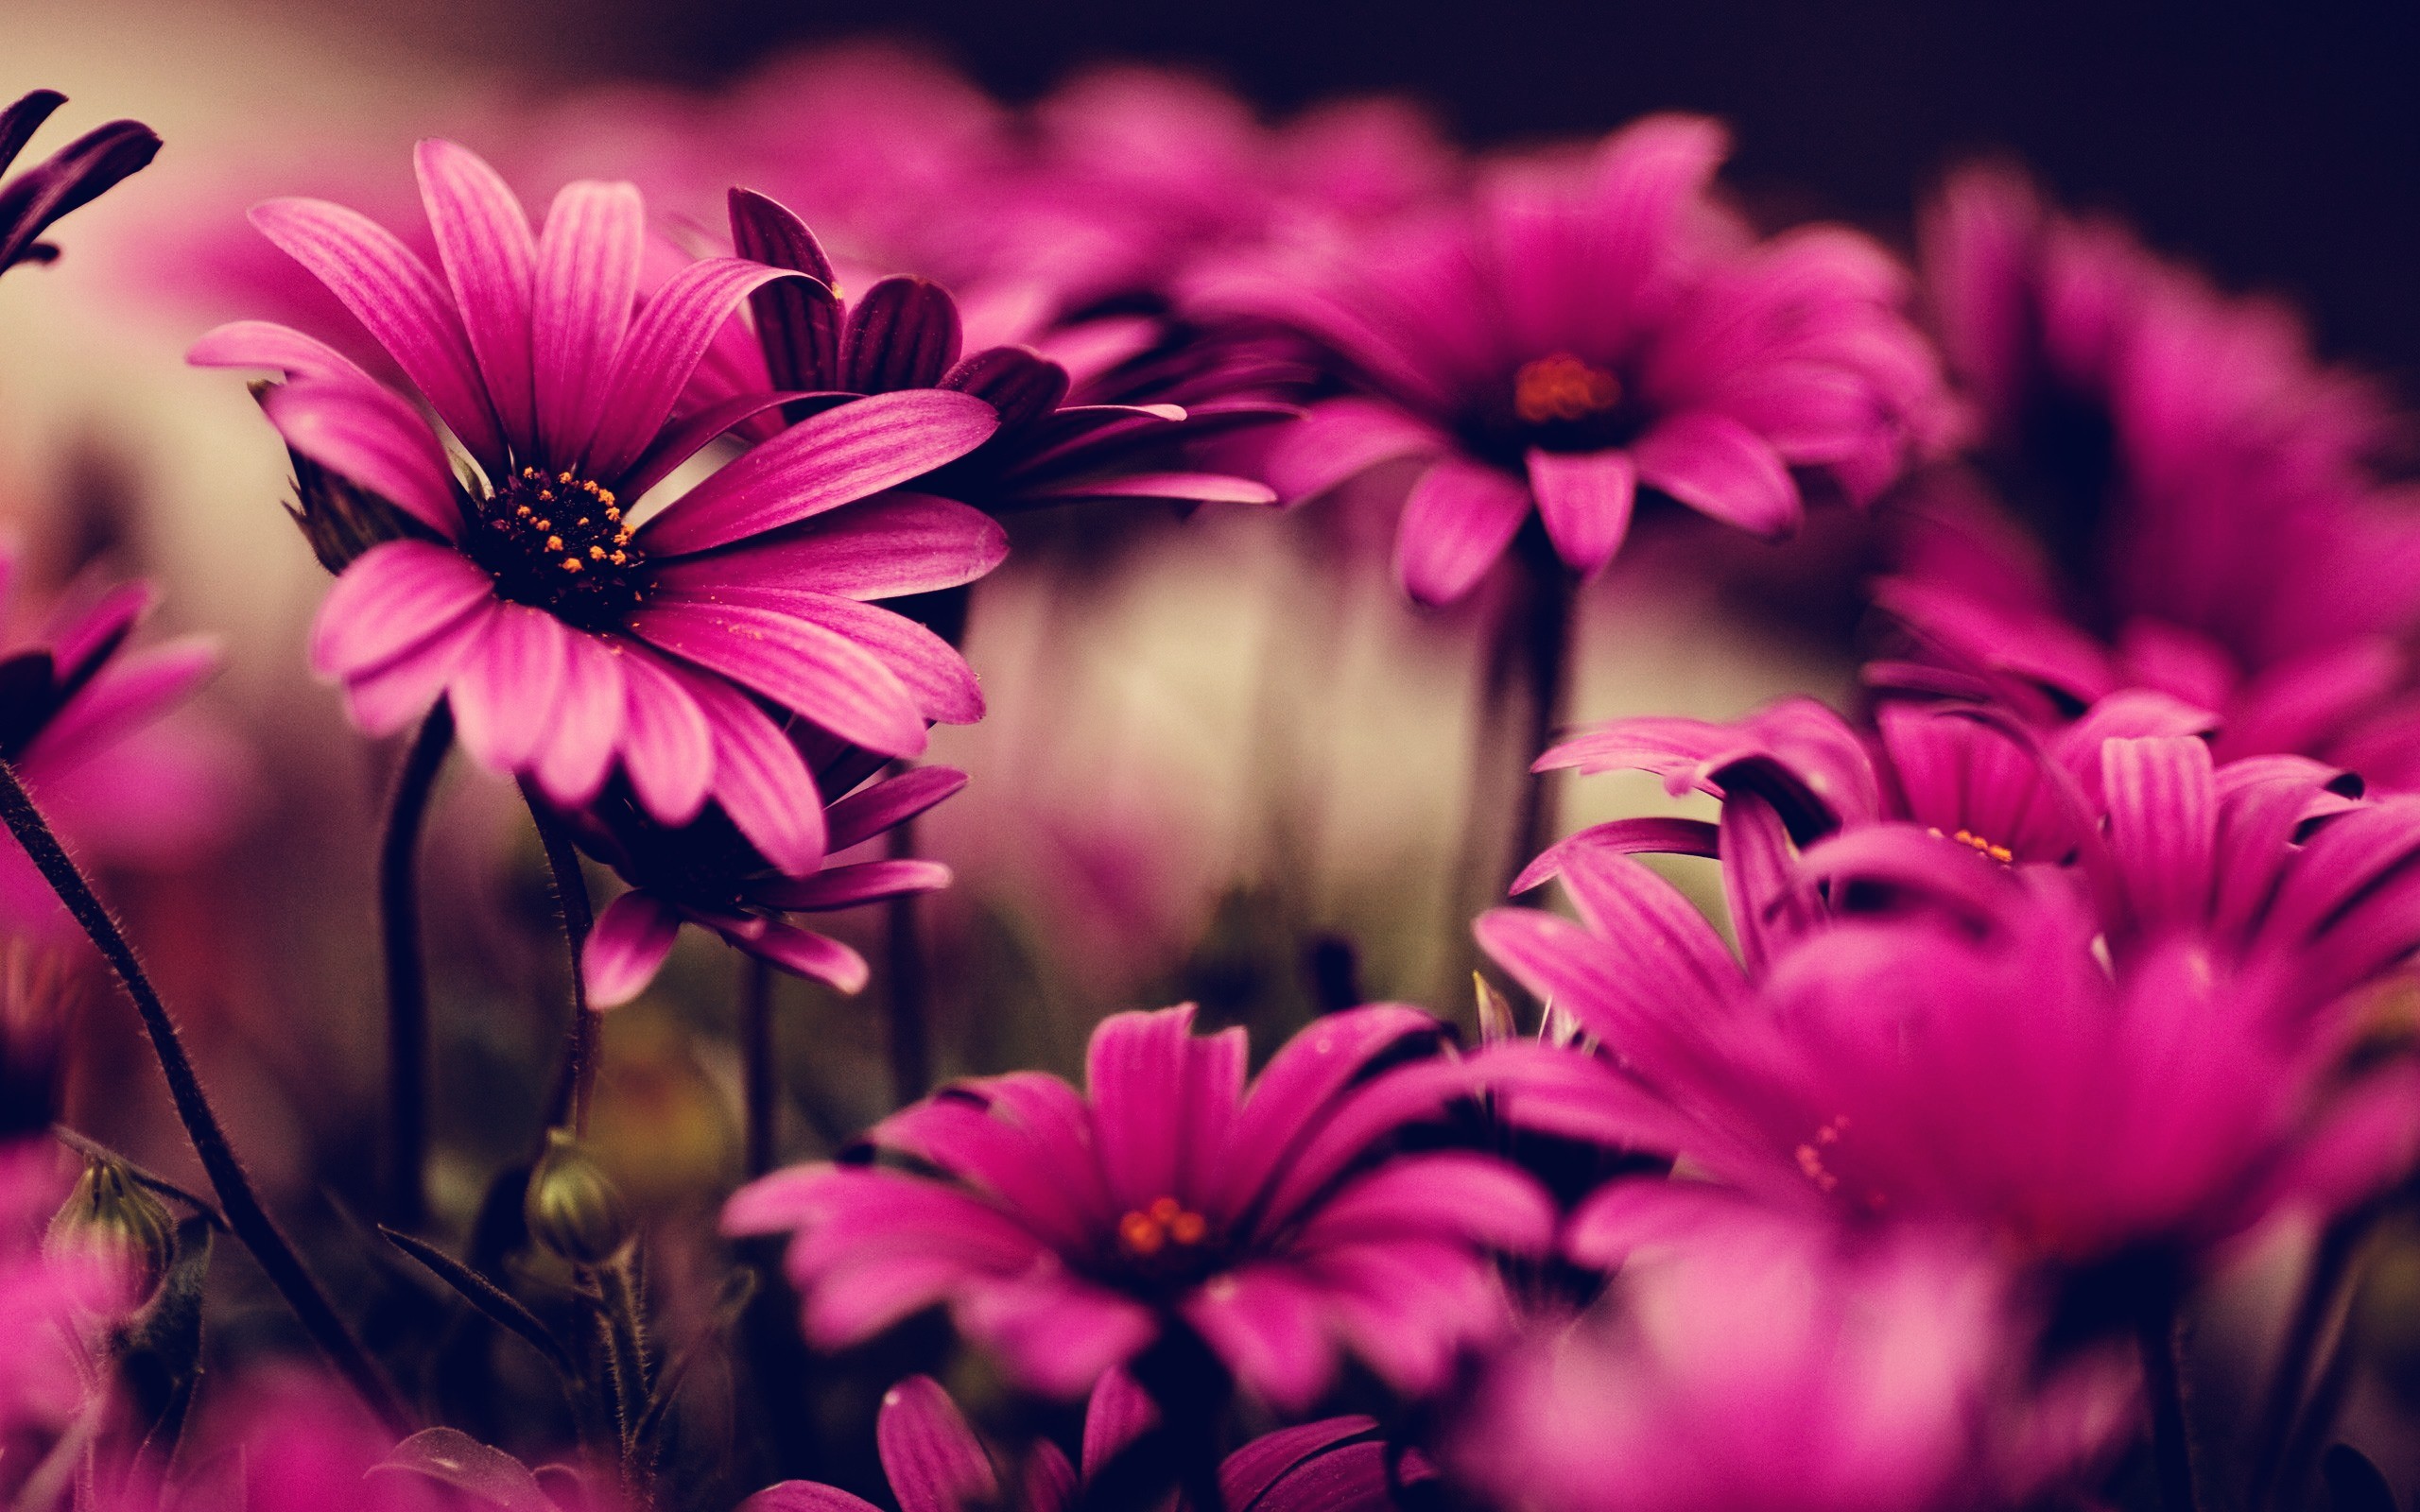 2560x1600 40 BEAUTIFUL FLOWER WALLPAPERS FREE TO DOWNLOAD | Pinterest | Flower  backgrounds, Flower and Resolutions